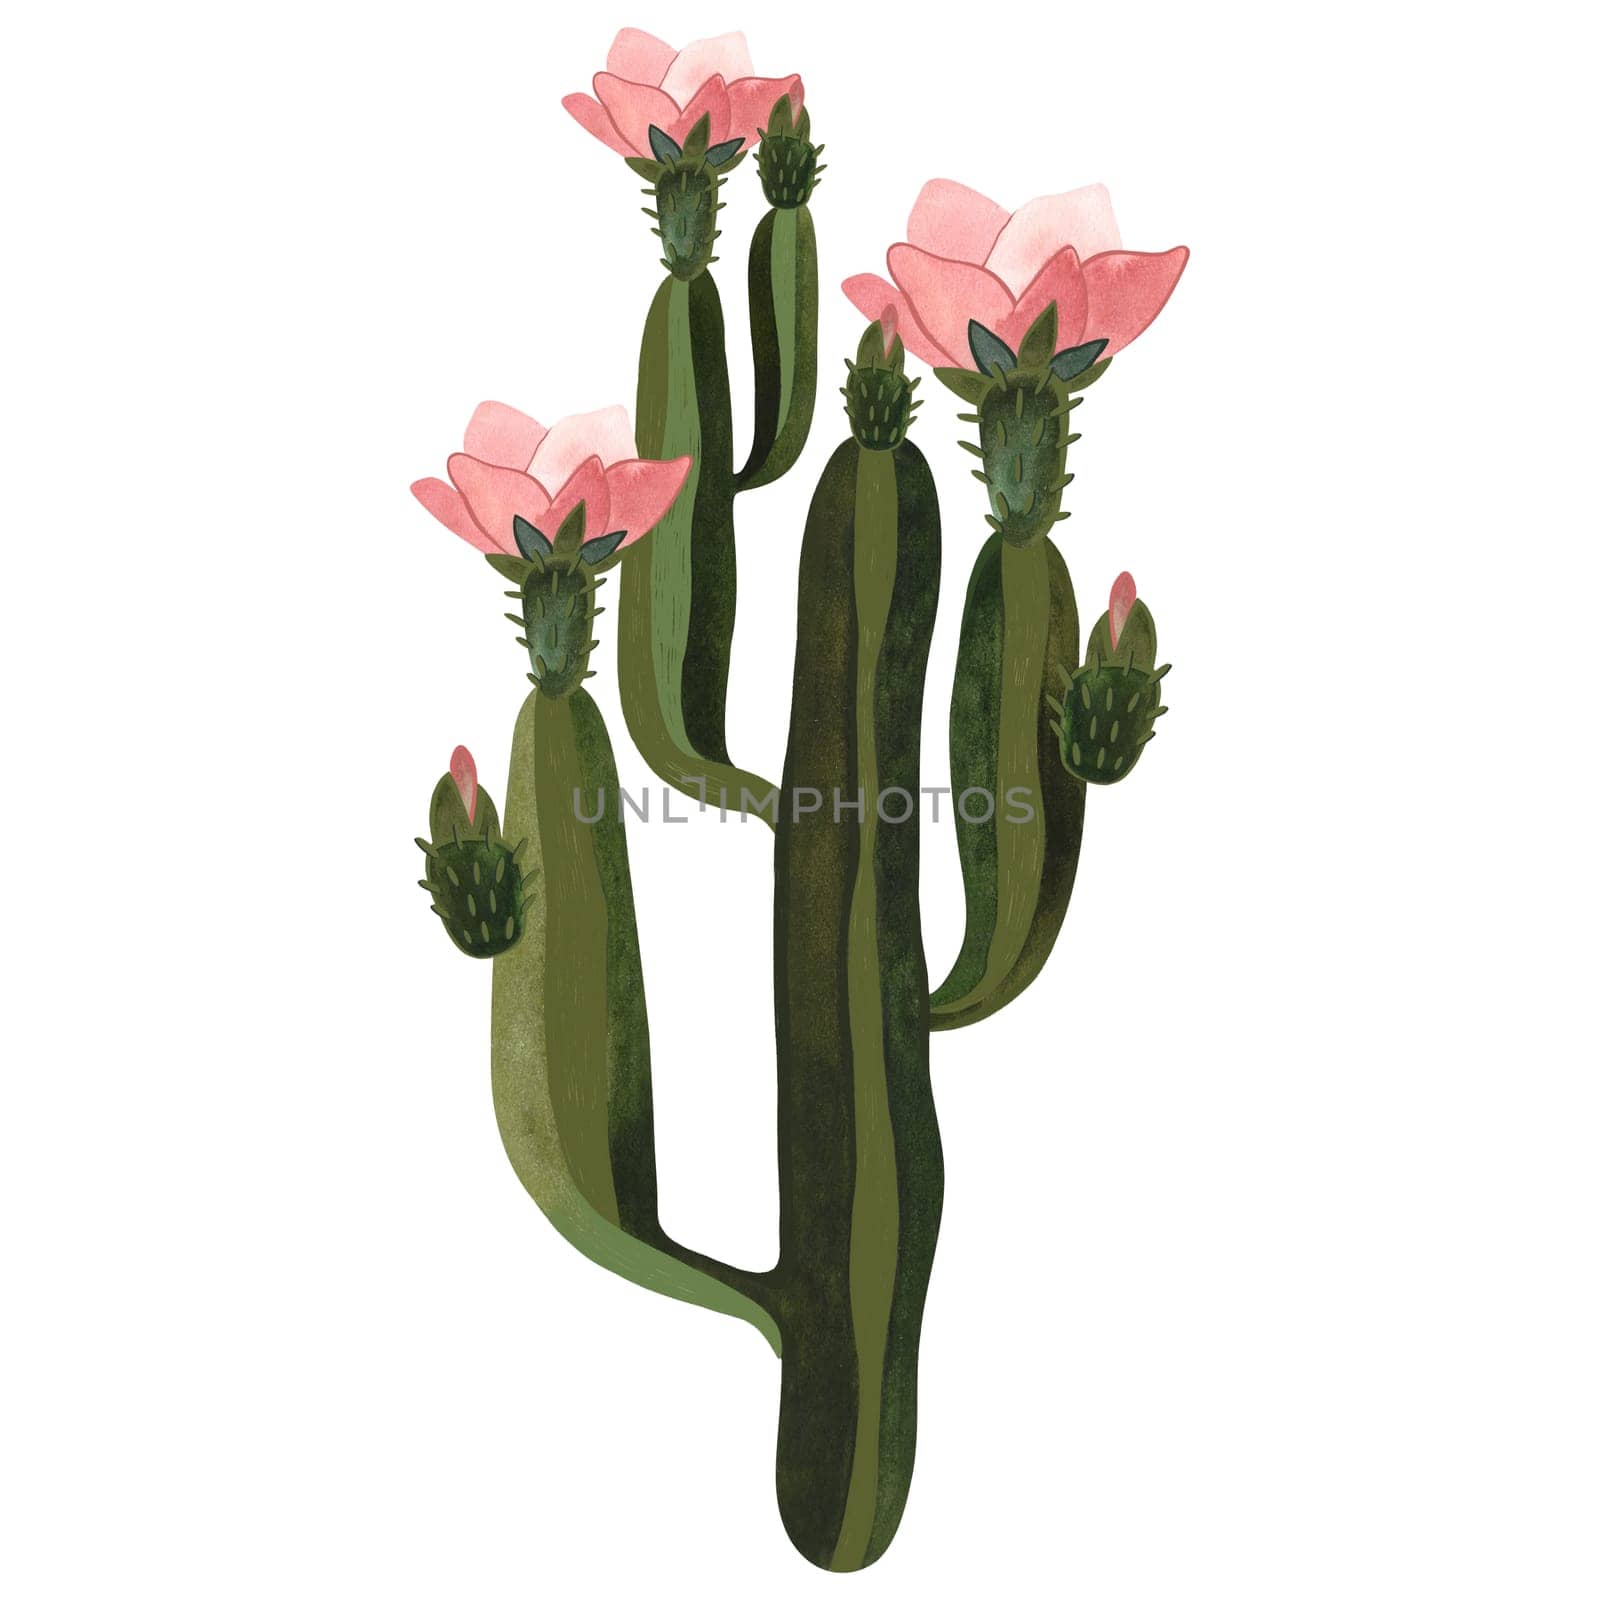 Blooming cactus with pink flowers. Plants for the home. Floriculture. Desert flora. Isolated watercolor illustration on white background. Clipart